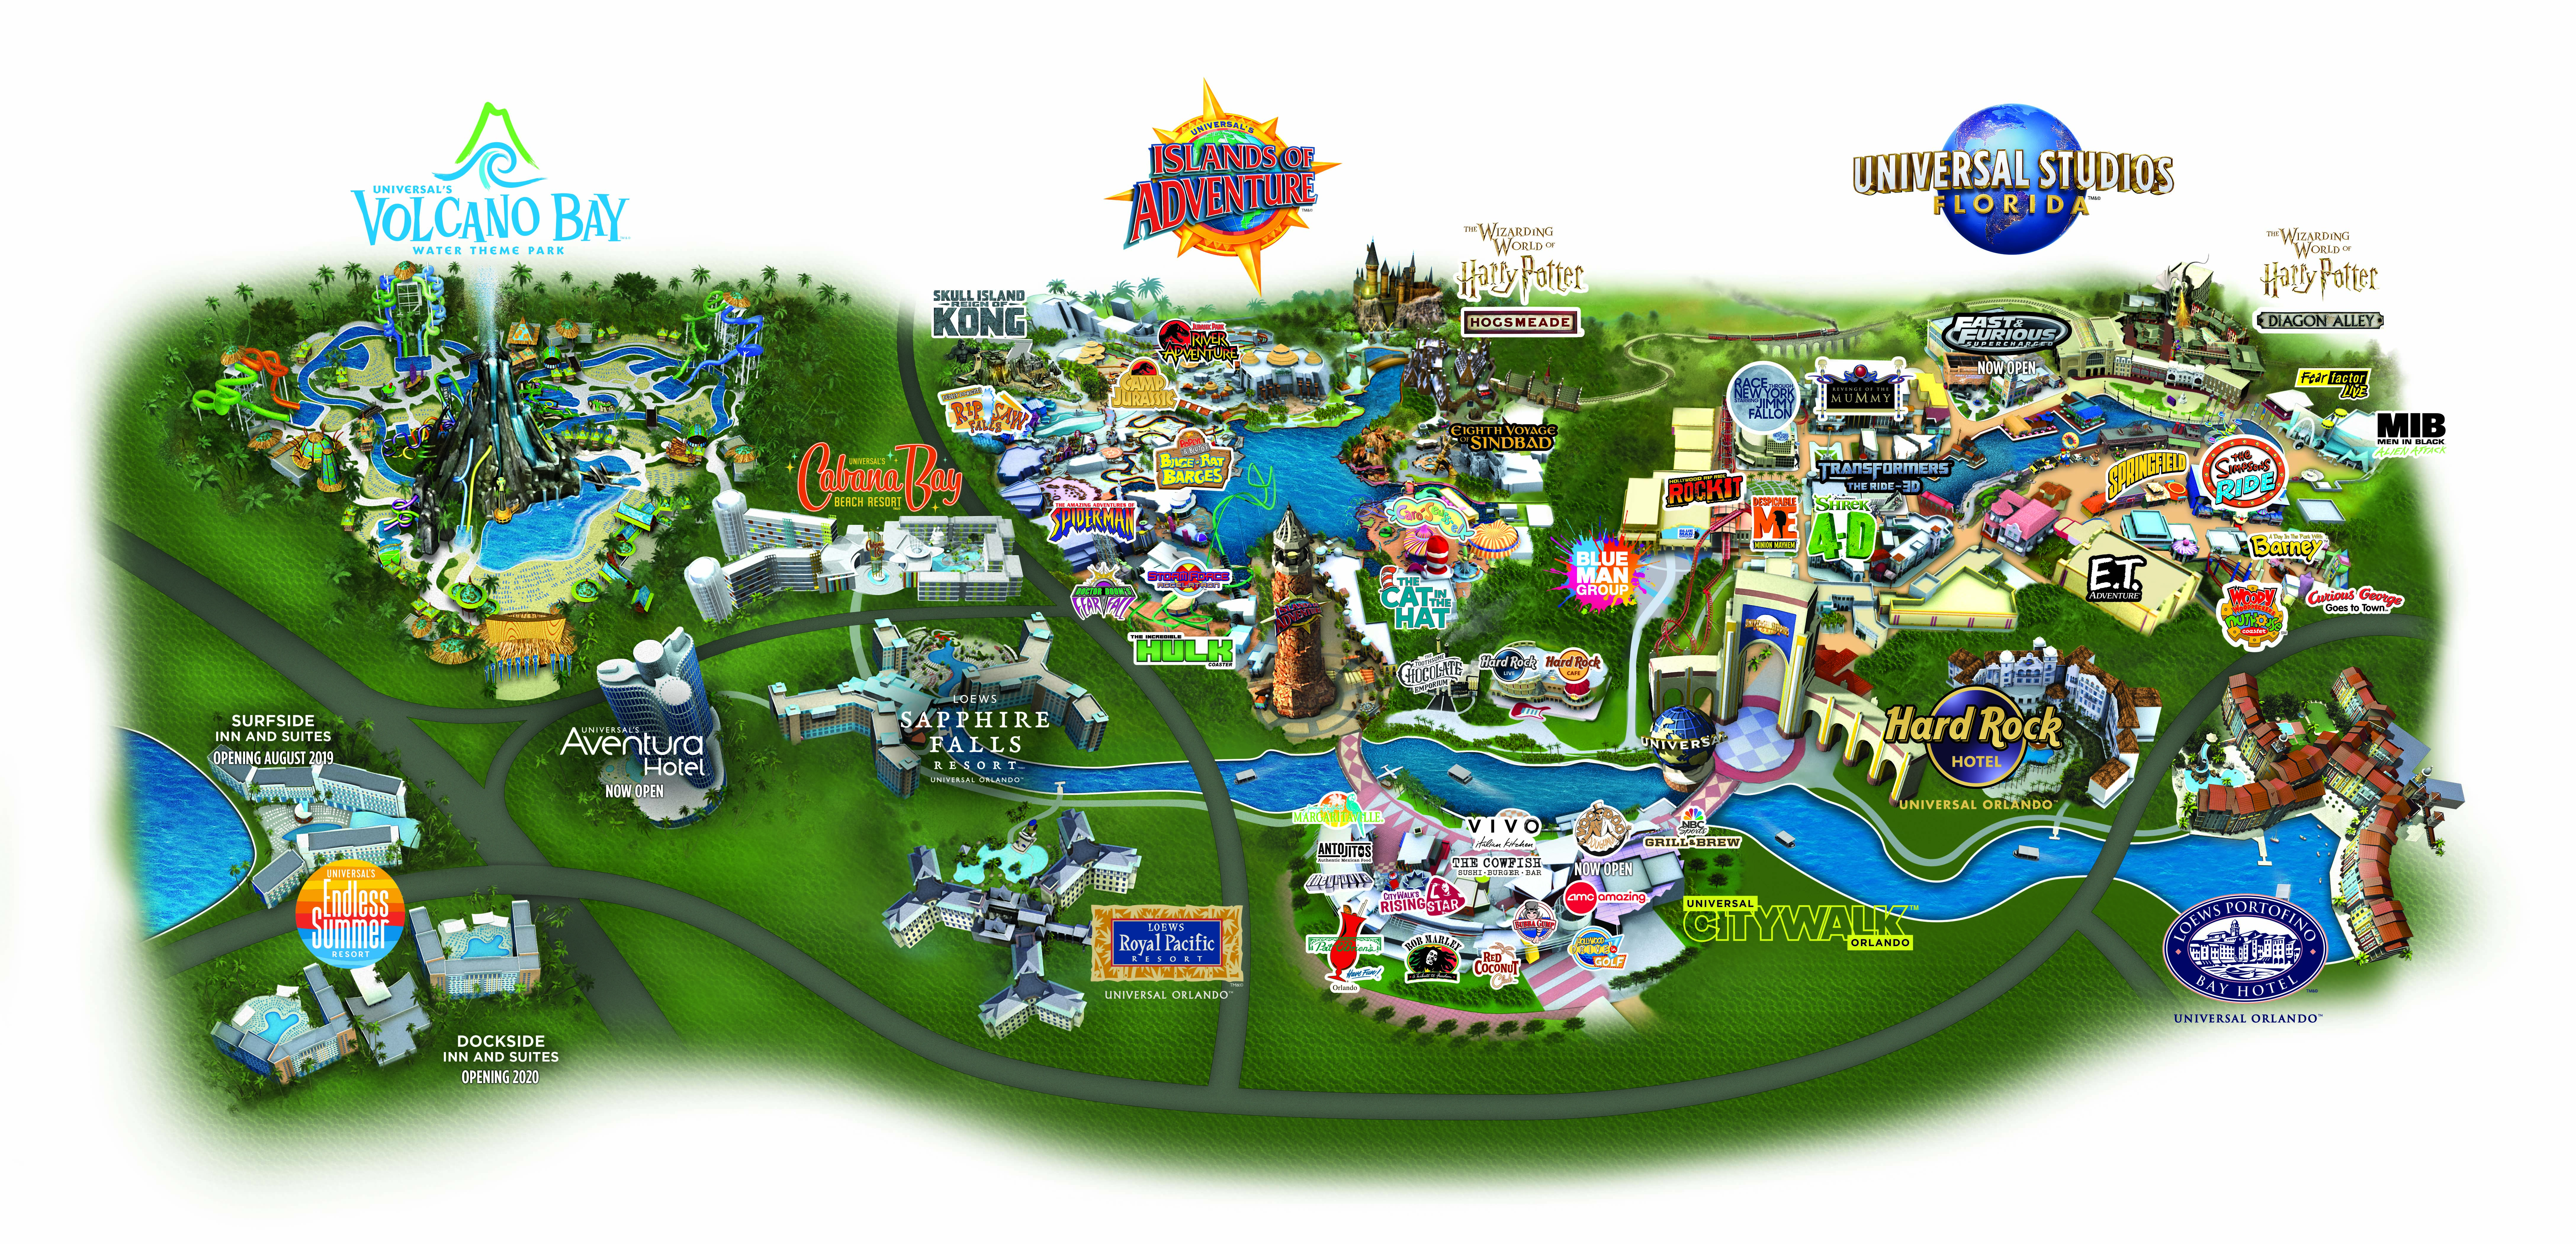 UNIVERSAL ORLANDO GUIDE WITH INFORMATION ON ATTRACTIONS 1 SHEET MAP 2013